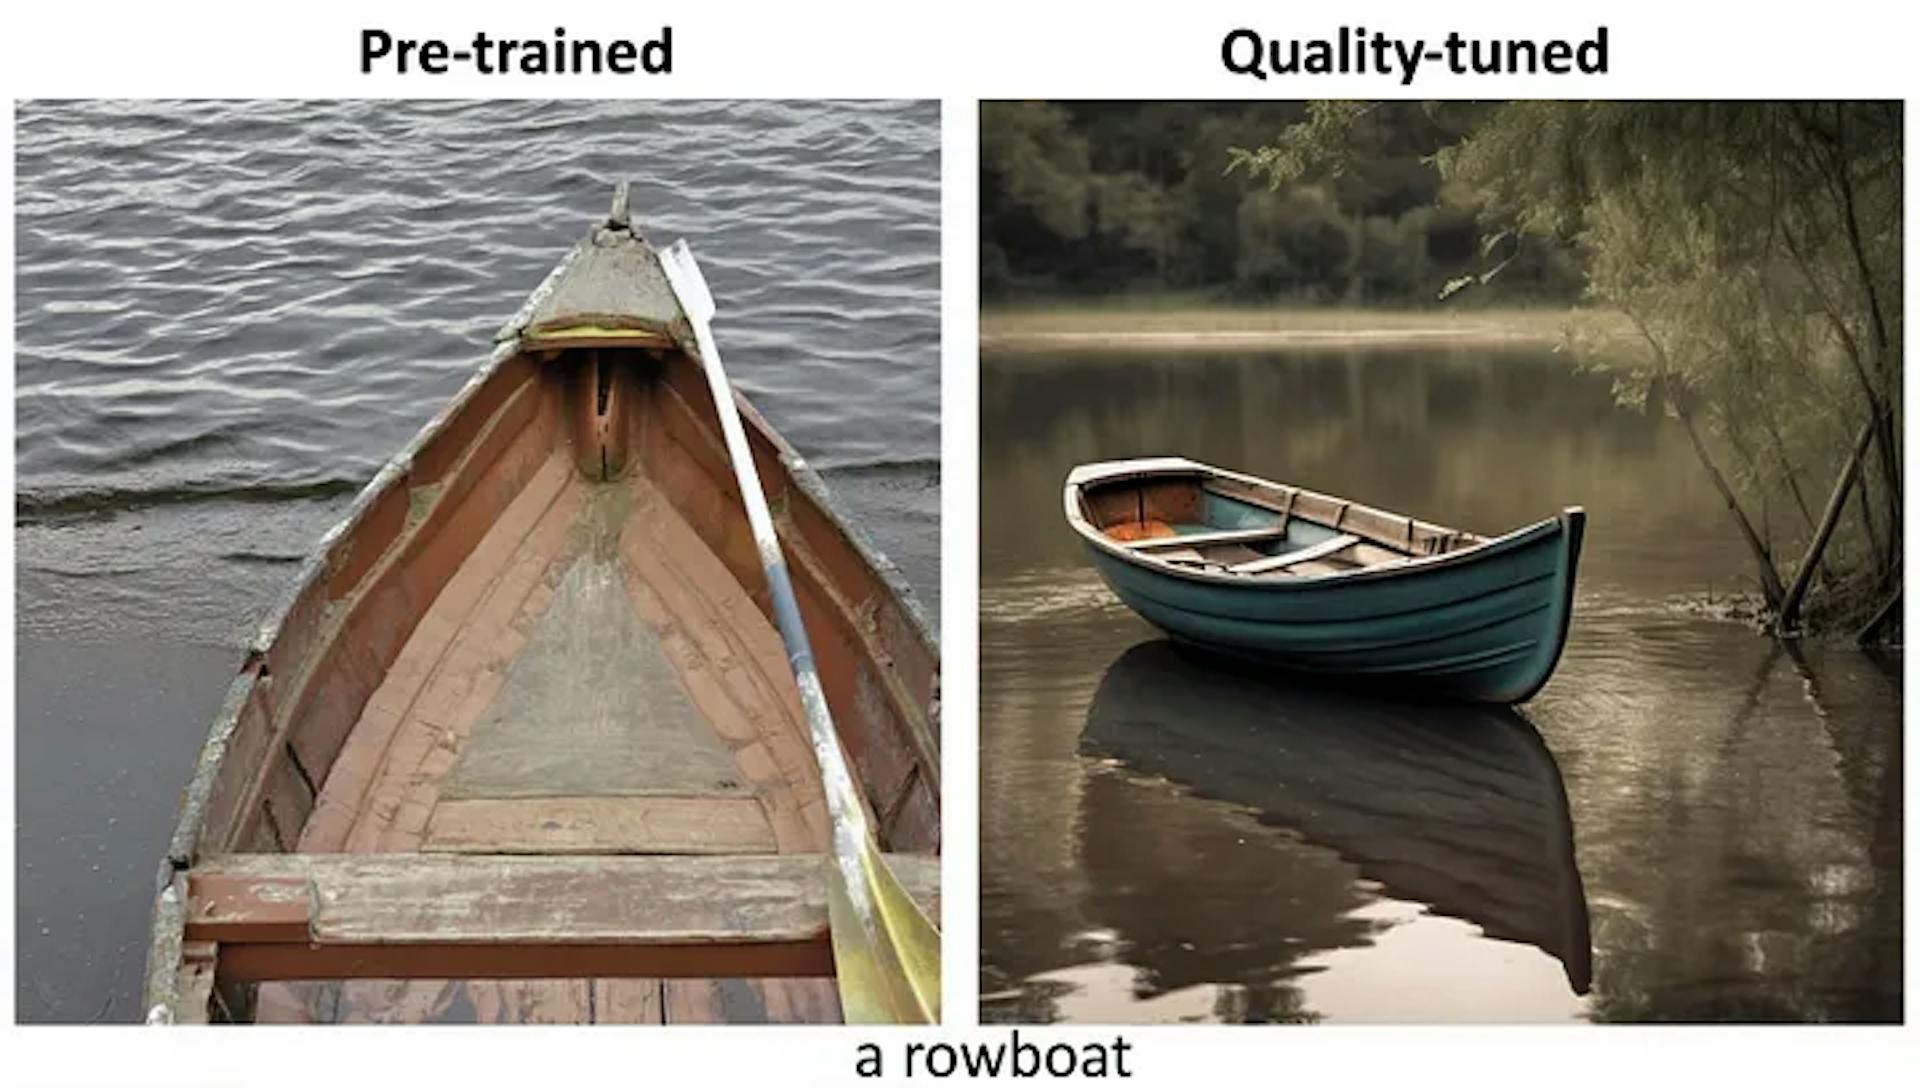 A side-by-side comparison of images generated by the pre-trained model and the quality tuned Emu model (taken from the paper)